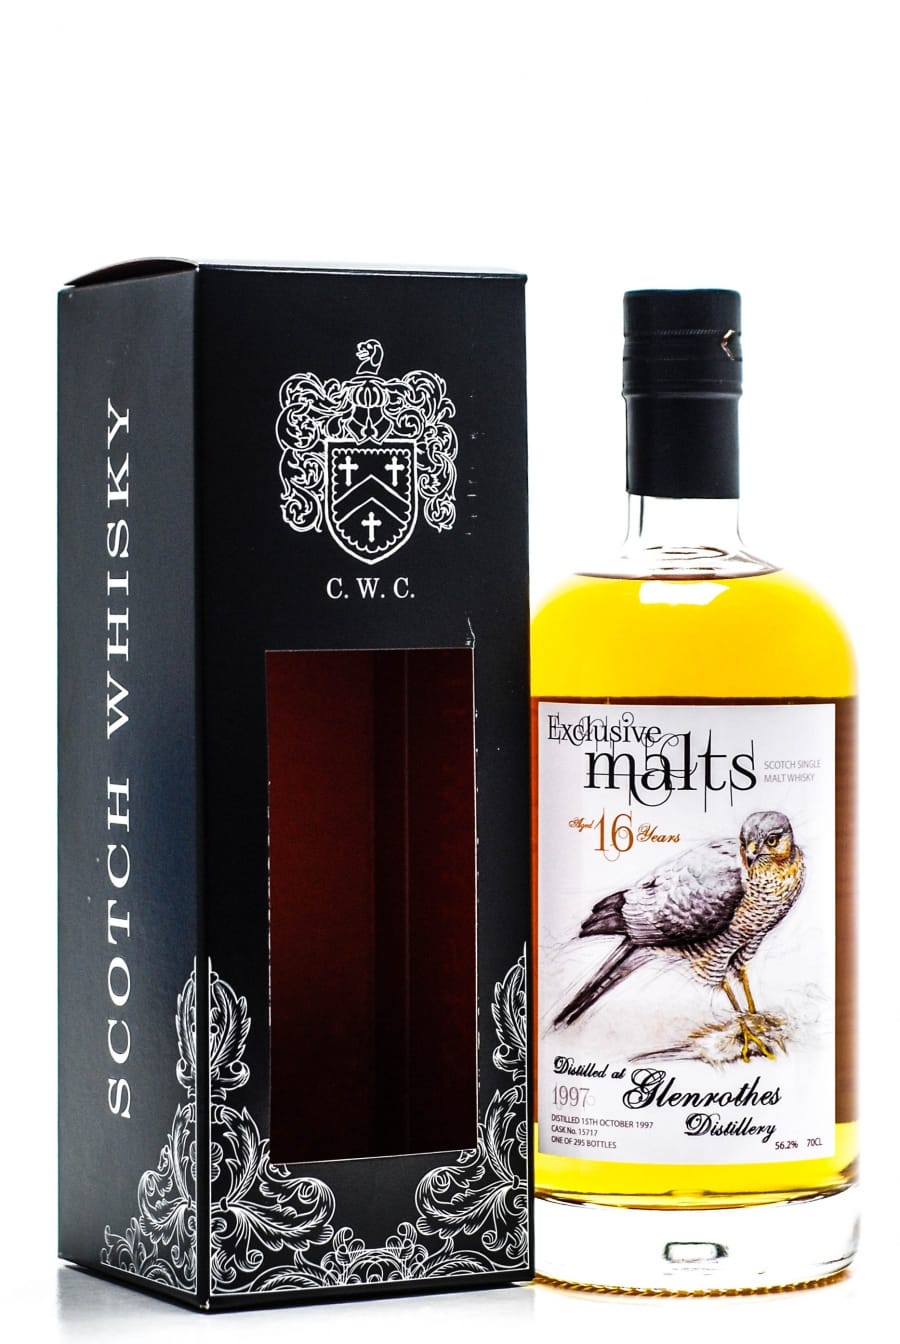 Glenrothes - 16 Years Old Creative Whisky Company Exclusive Malts Bird of Prey label Cask:15717 56.2% 1997 In Original Container